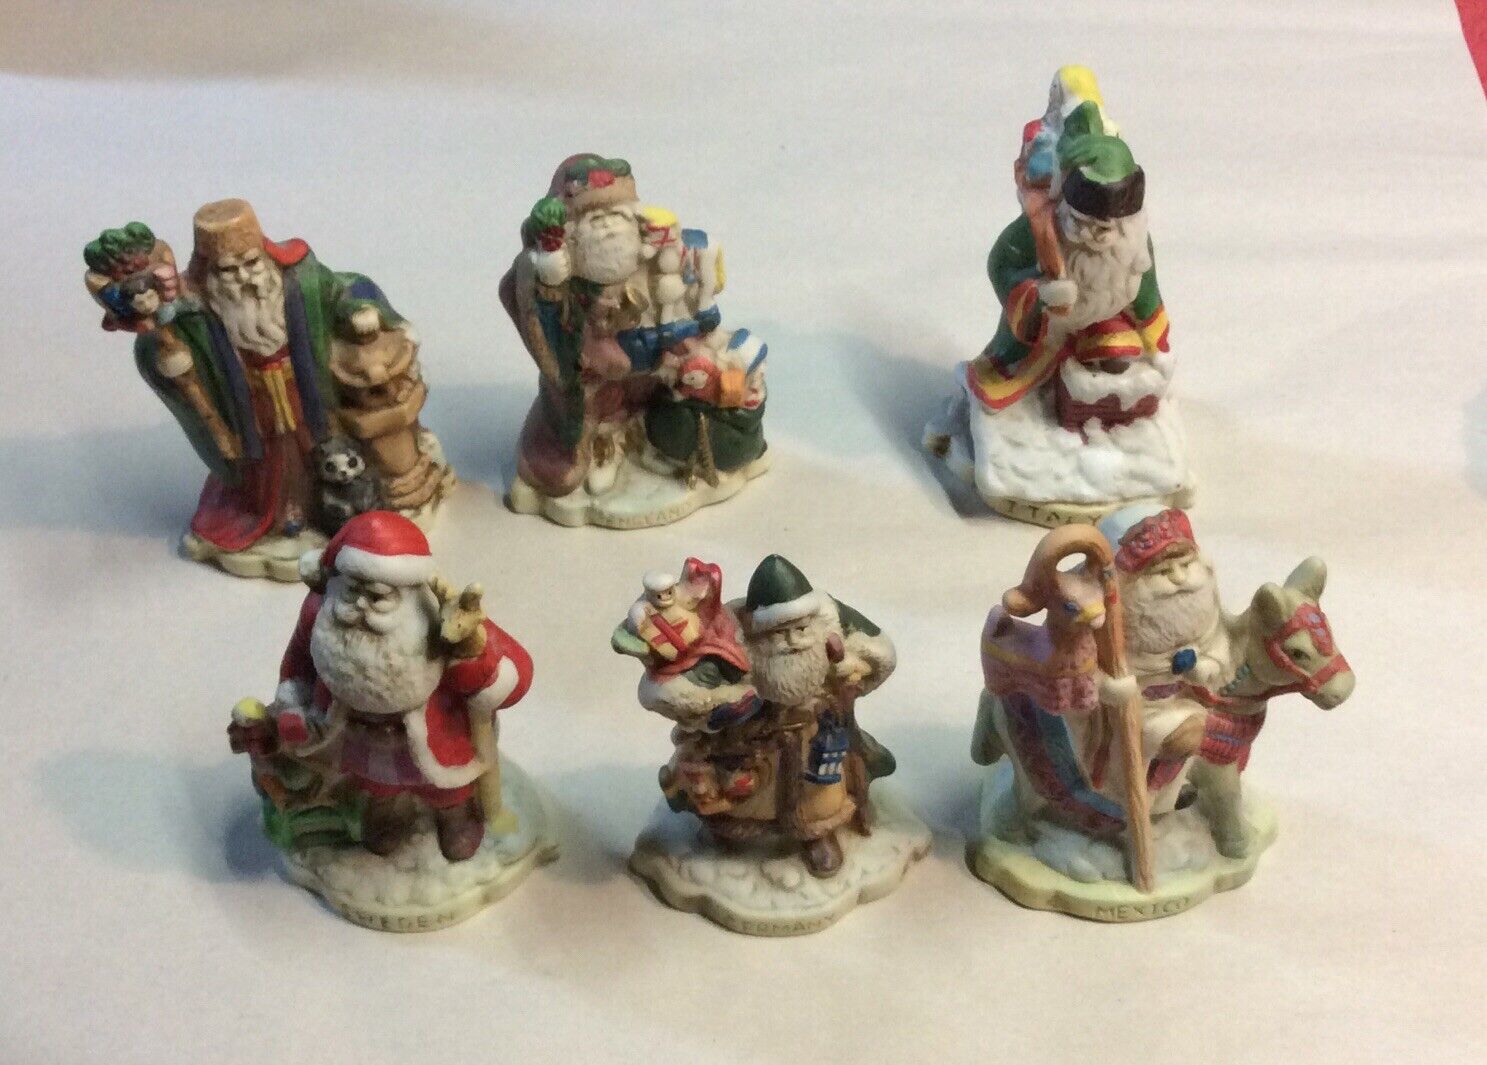 VTG Lot Of 6 RSVP 1991 Santa Christmas Figurines 4.5” Height Made In Taiwan